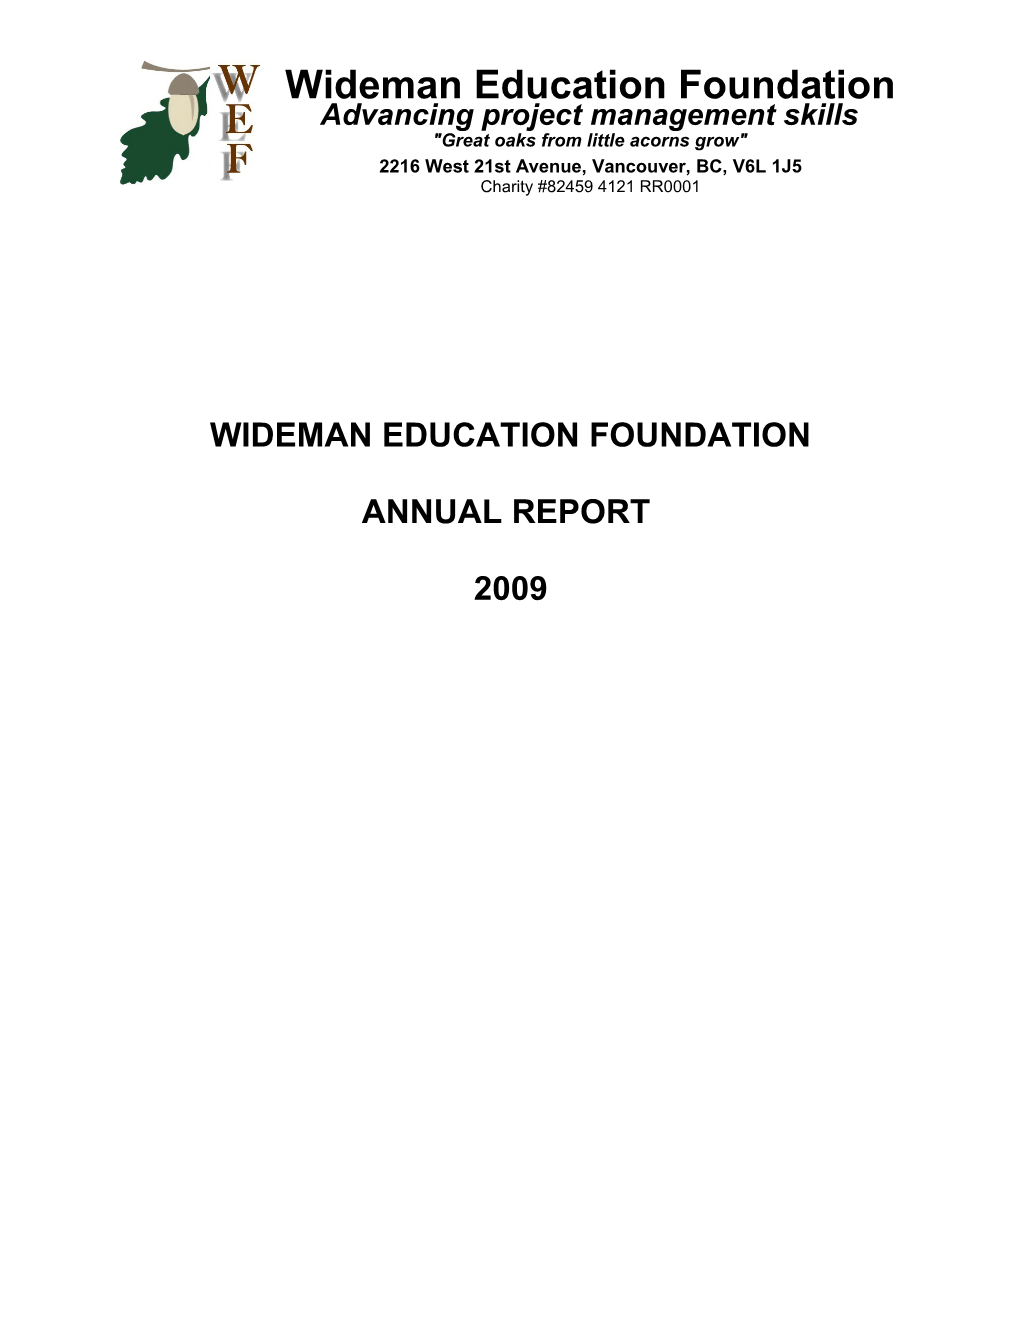 Wideman Education Foundation Annual Report for 2009Page 1